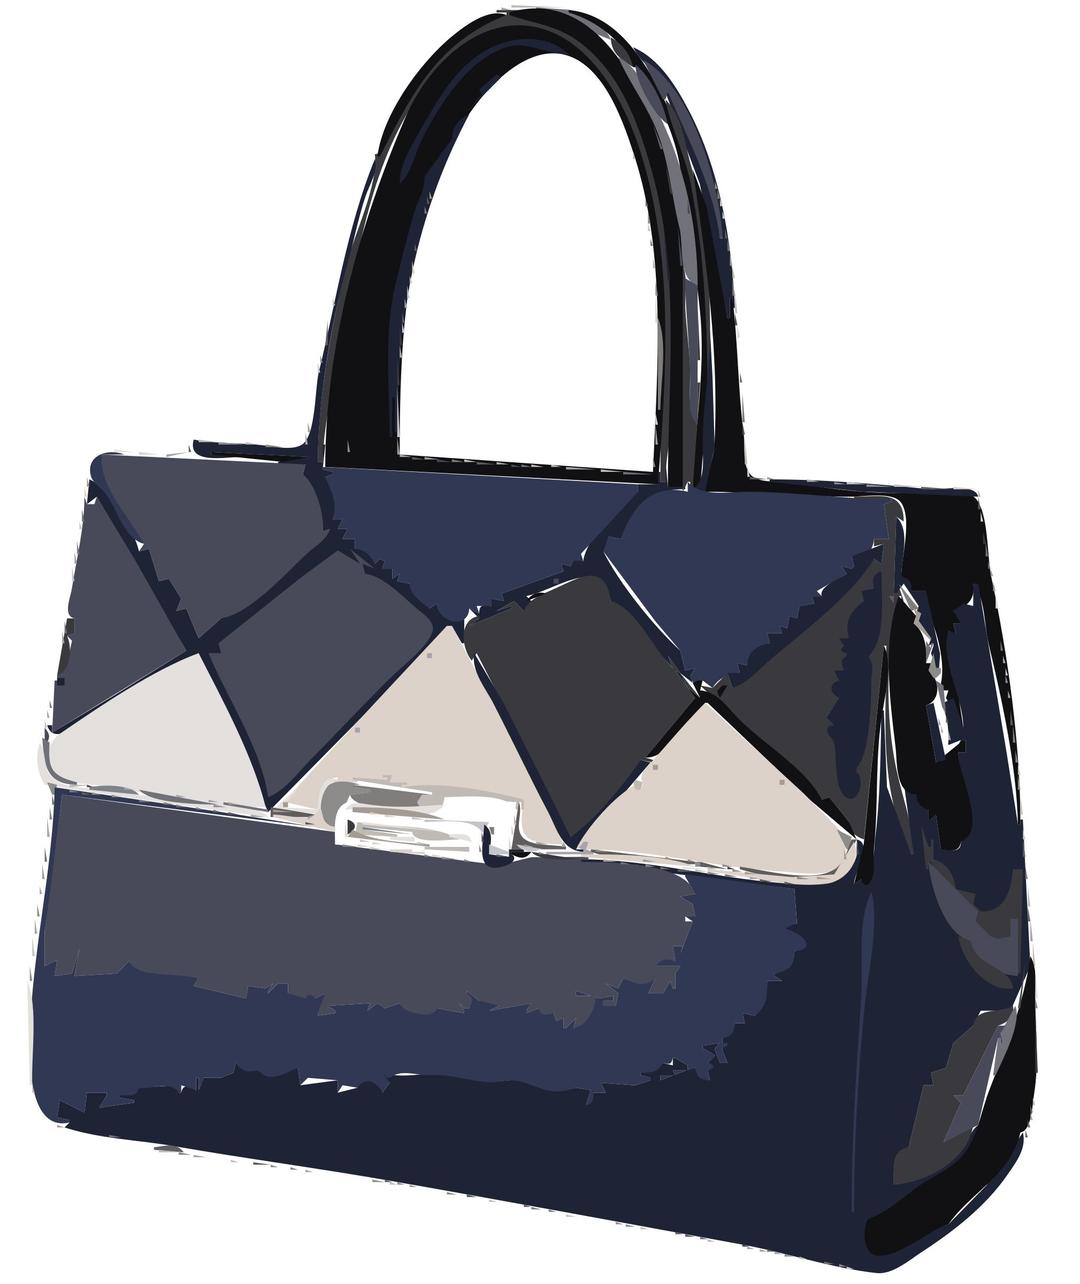 Dark Blue Leather Purse without Logo png transparent